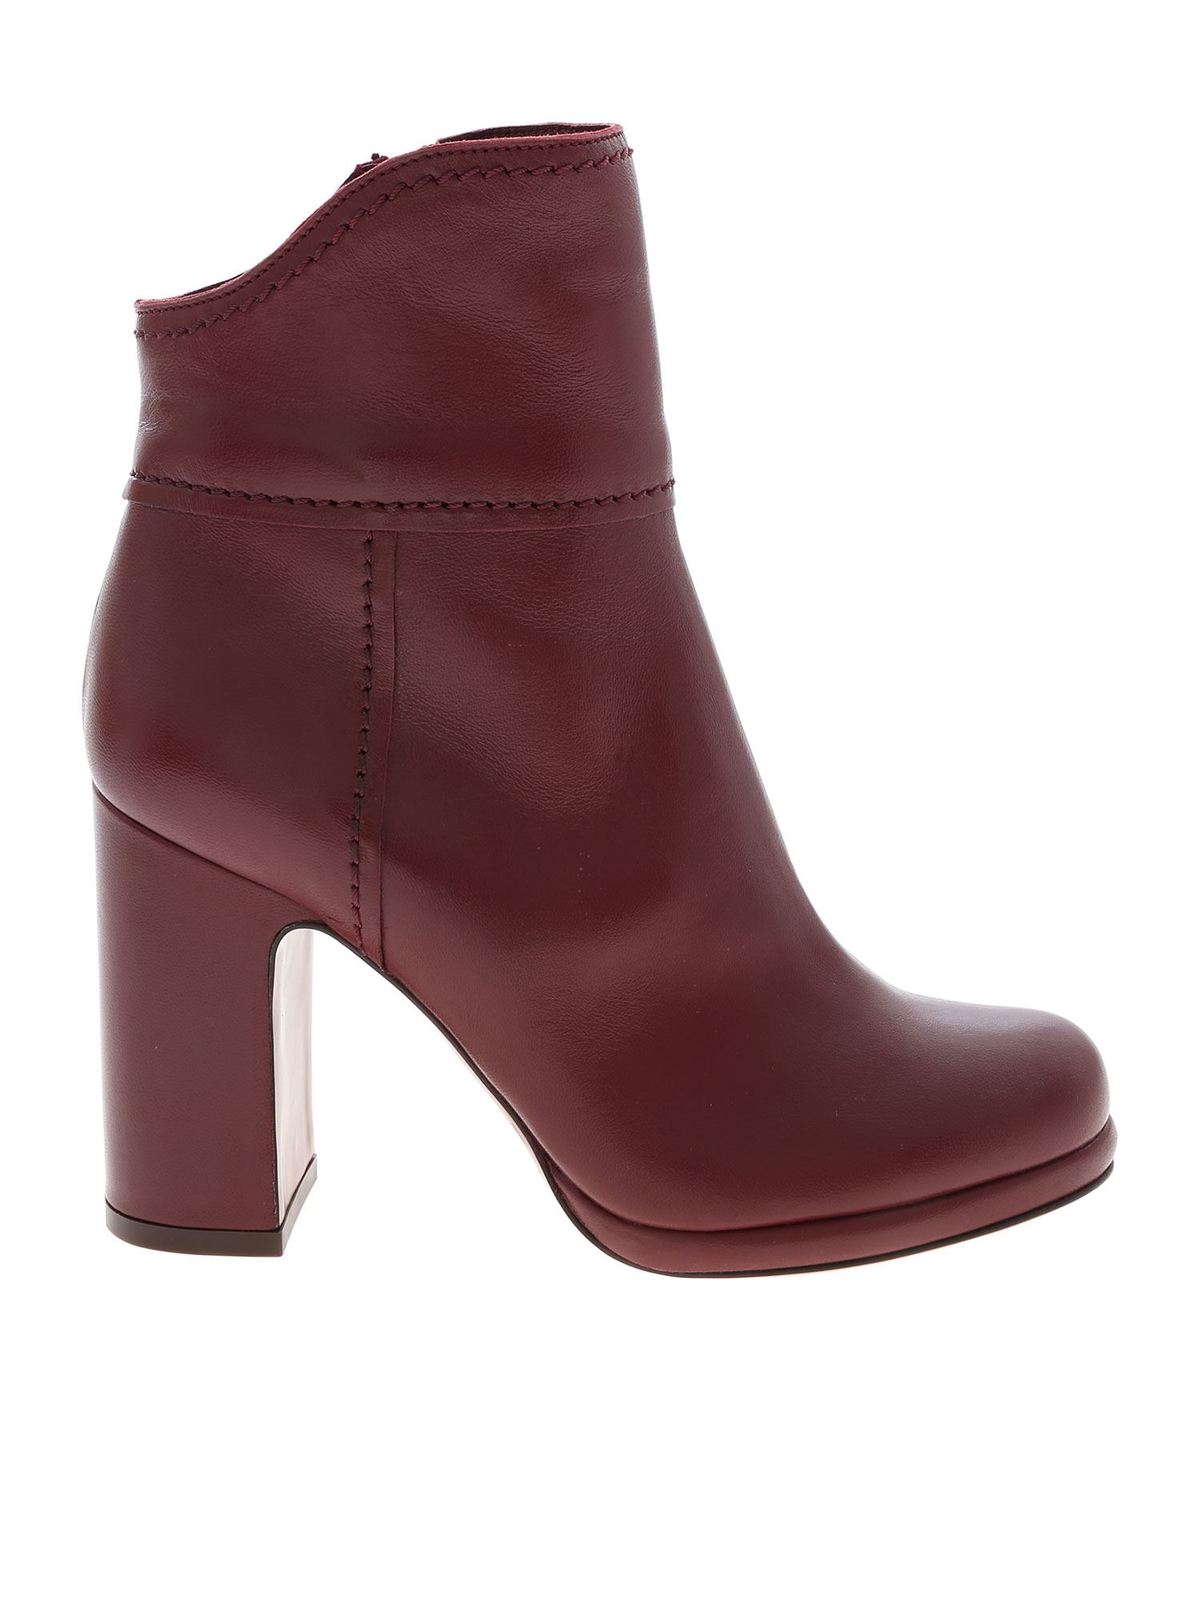 burgundy ankle boots